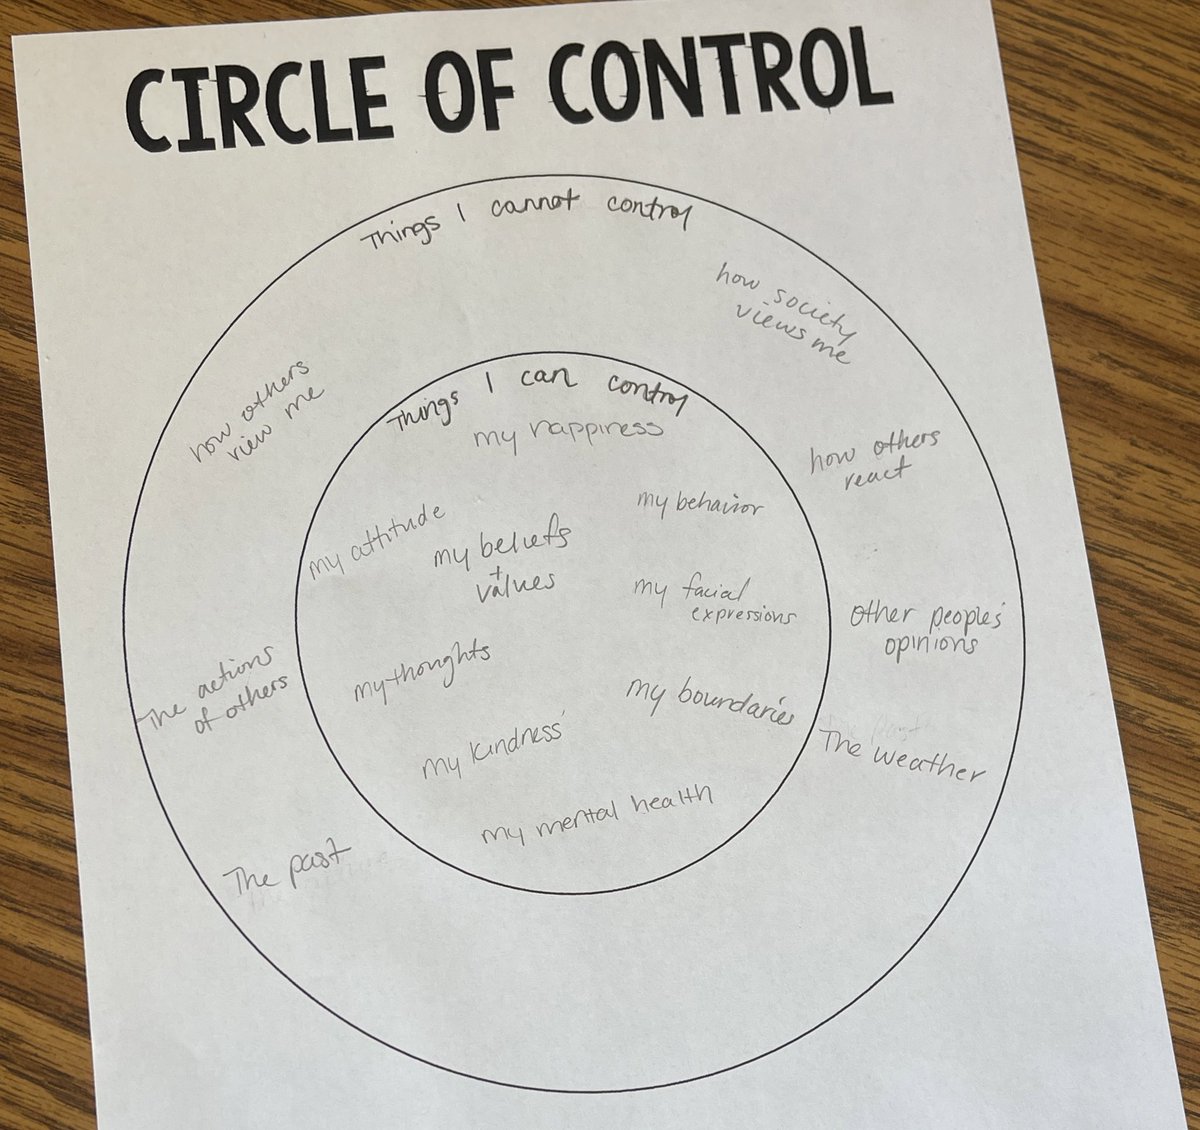 Parent Wellness Series Week 4 ⭐️ Relationship Skills, Circle of Control and began creating a Family Charter 🤗
#RelationshipSkills #SEL #TogetherWeCan